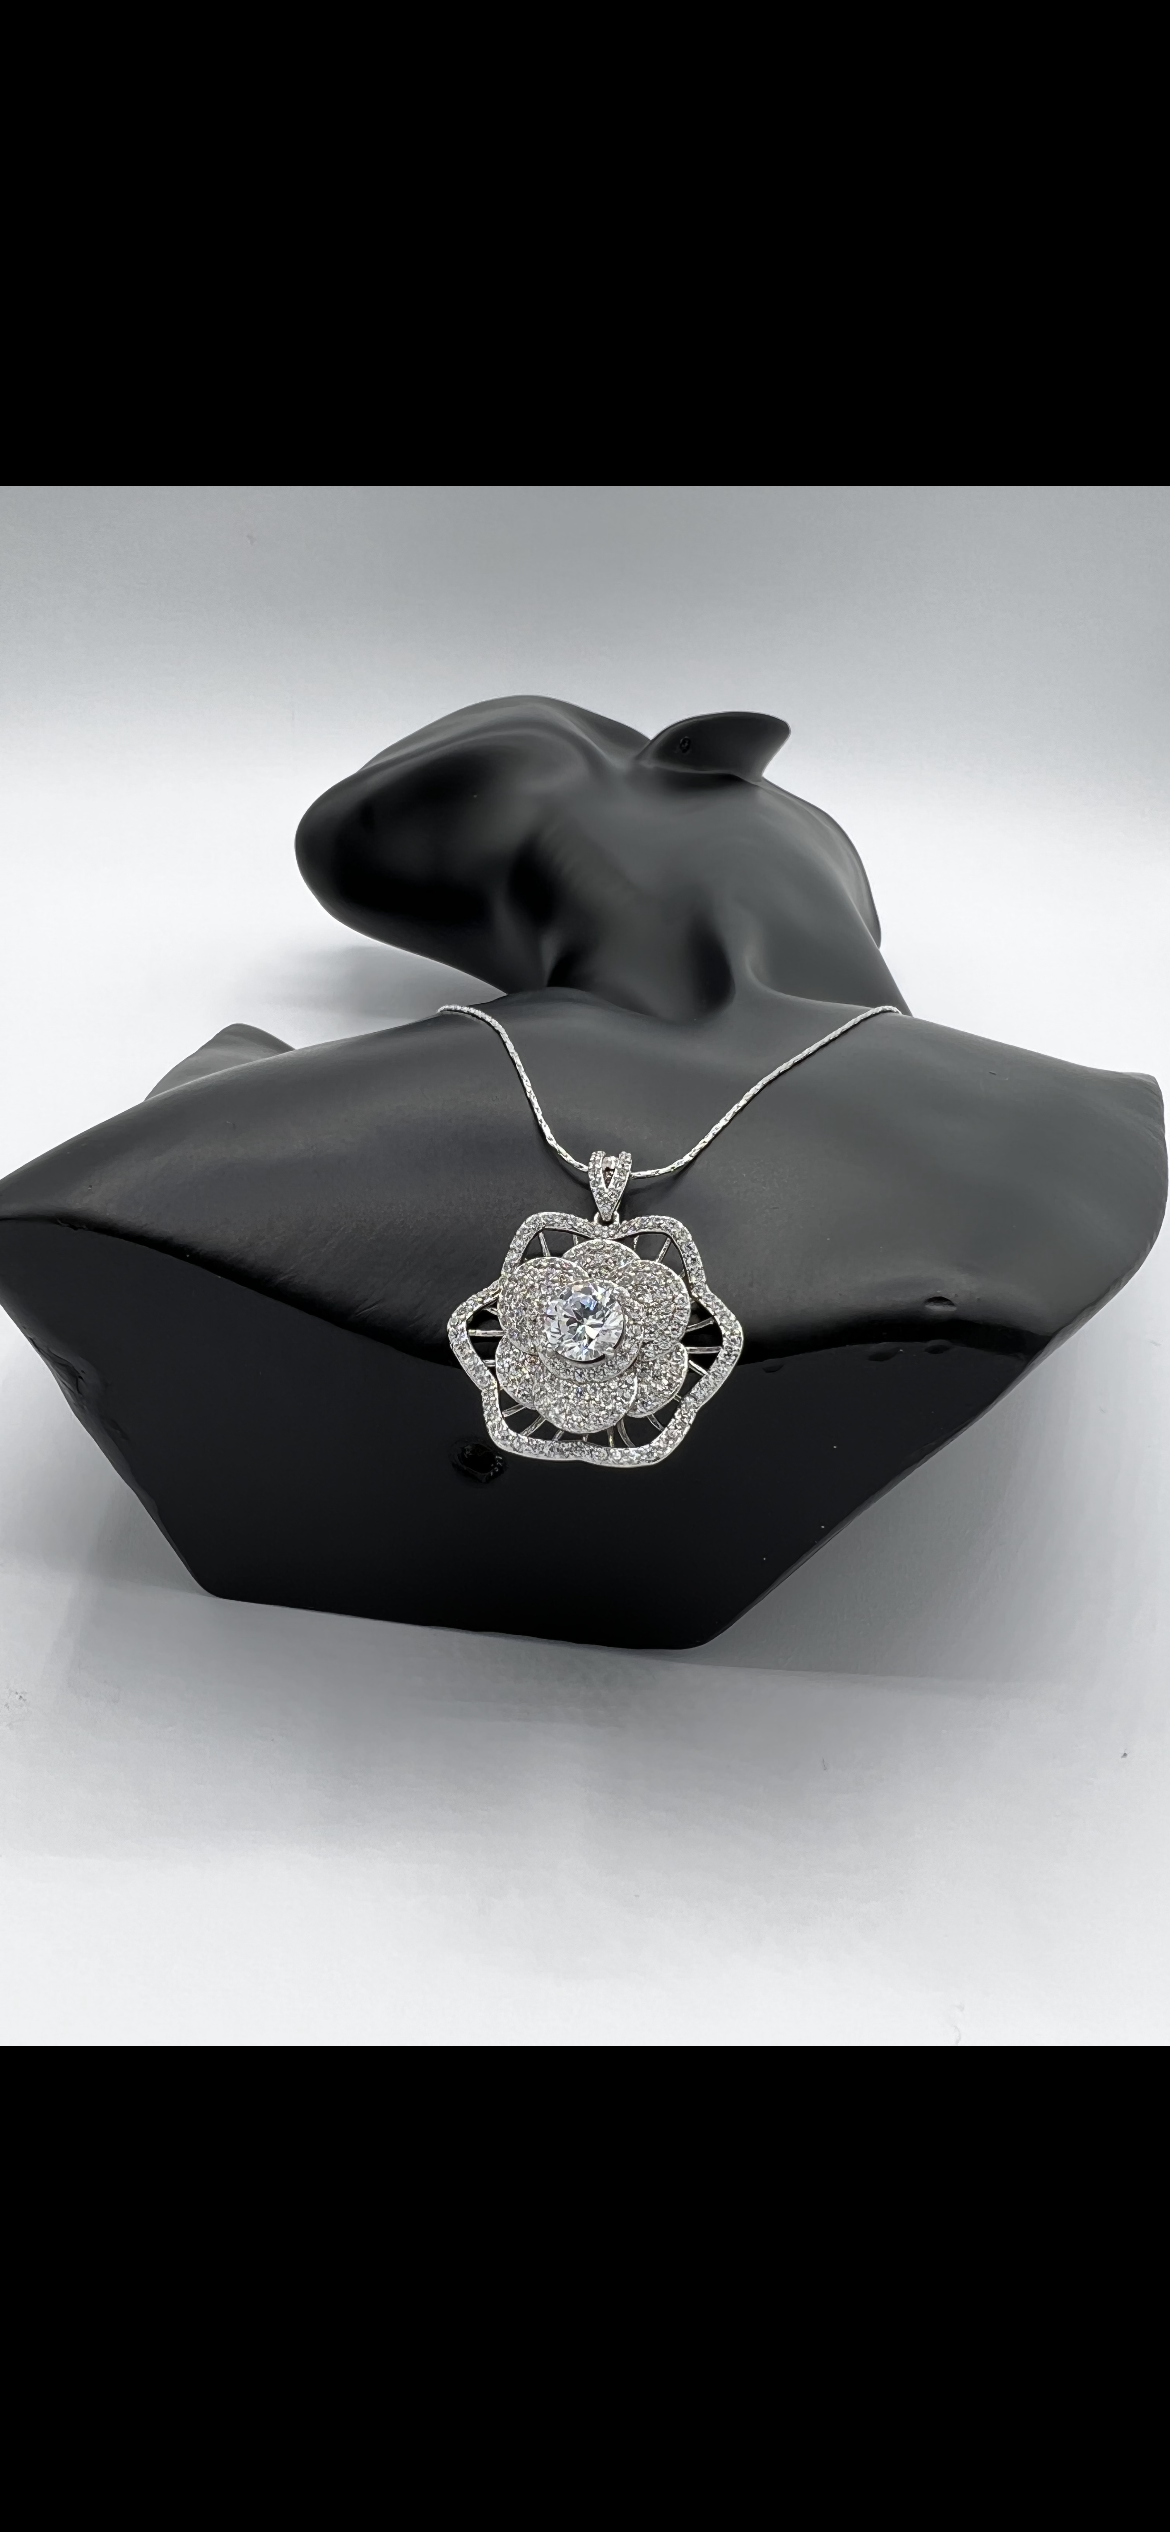 Blossoming Beauty: 3D Rhodium-Plated Flower Necklace